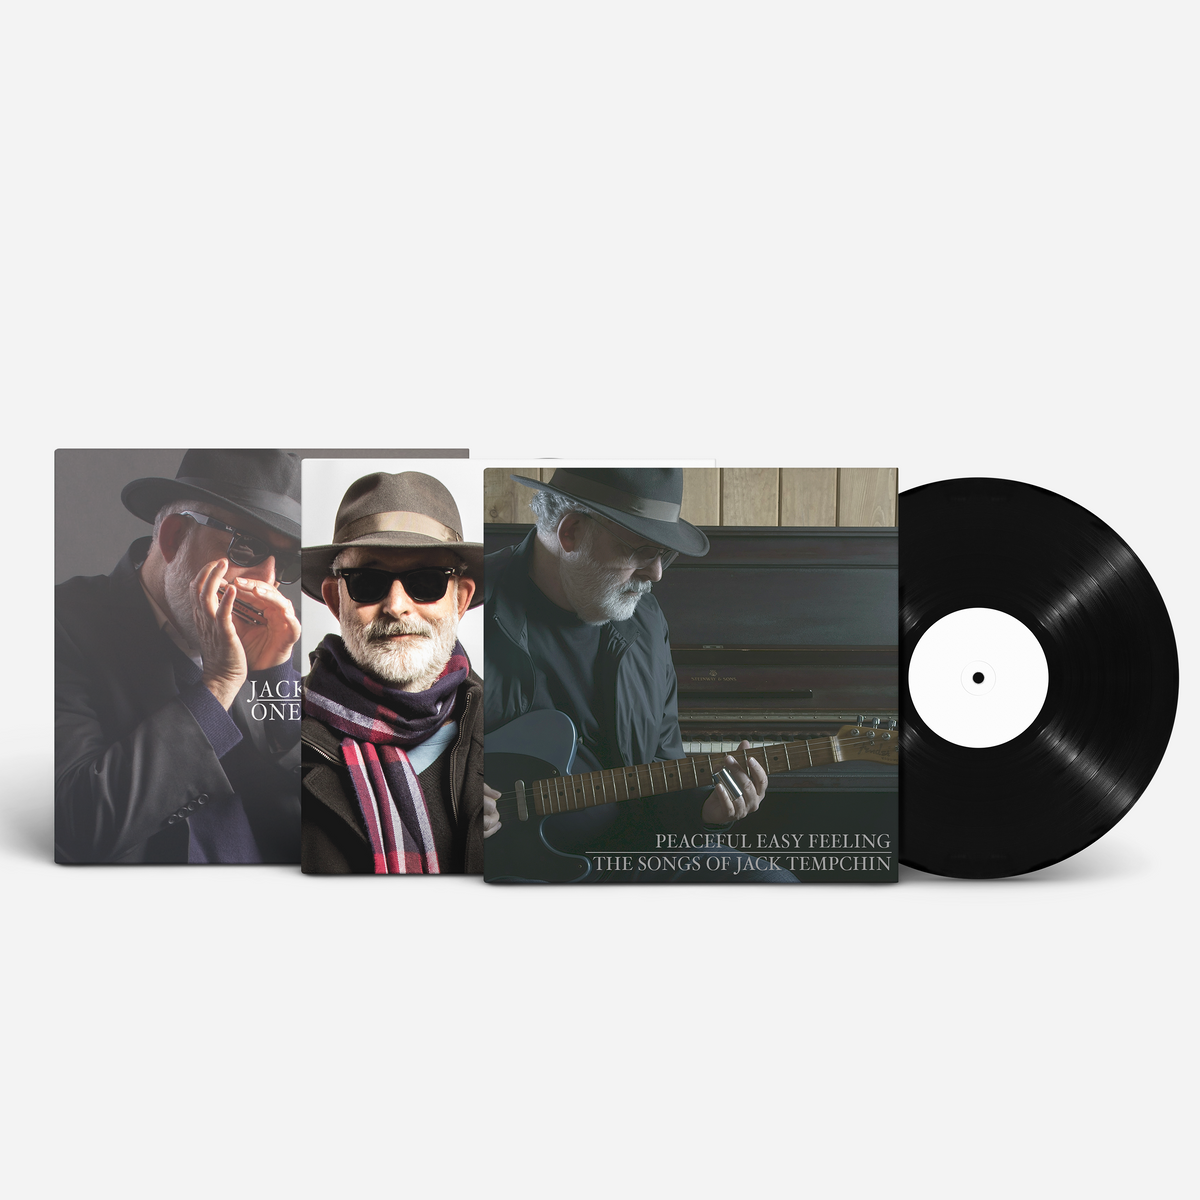 Hall of Fame - Vinyl Package